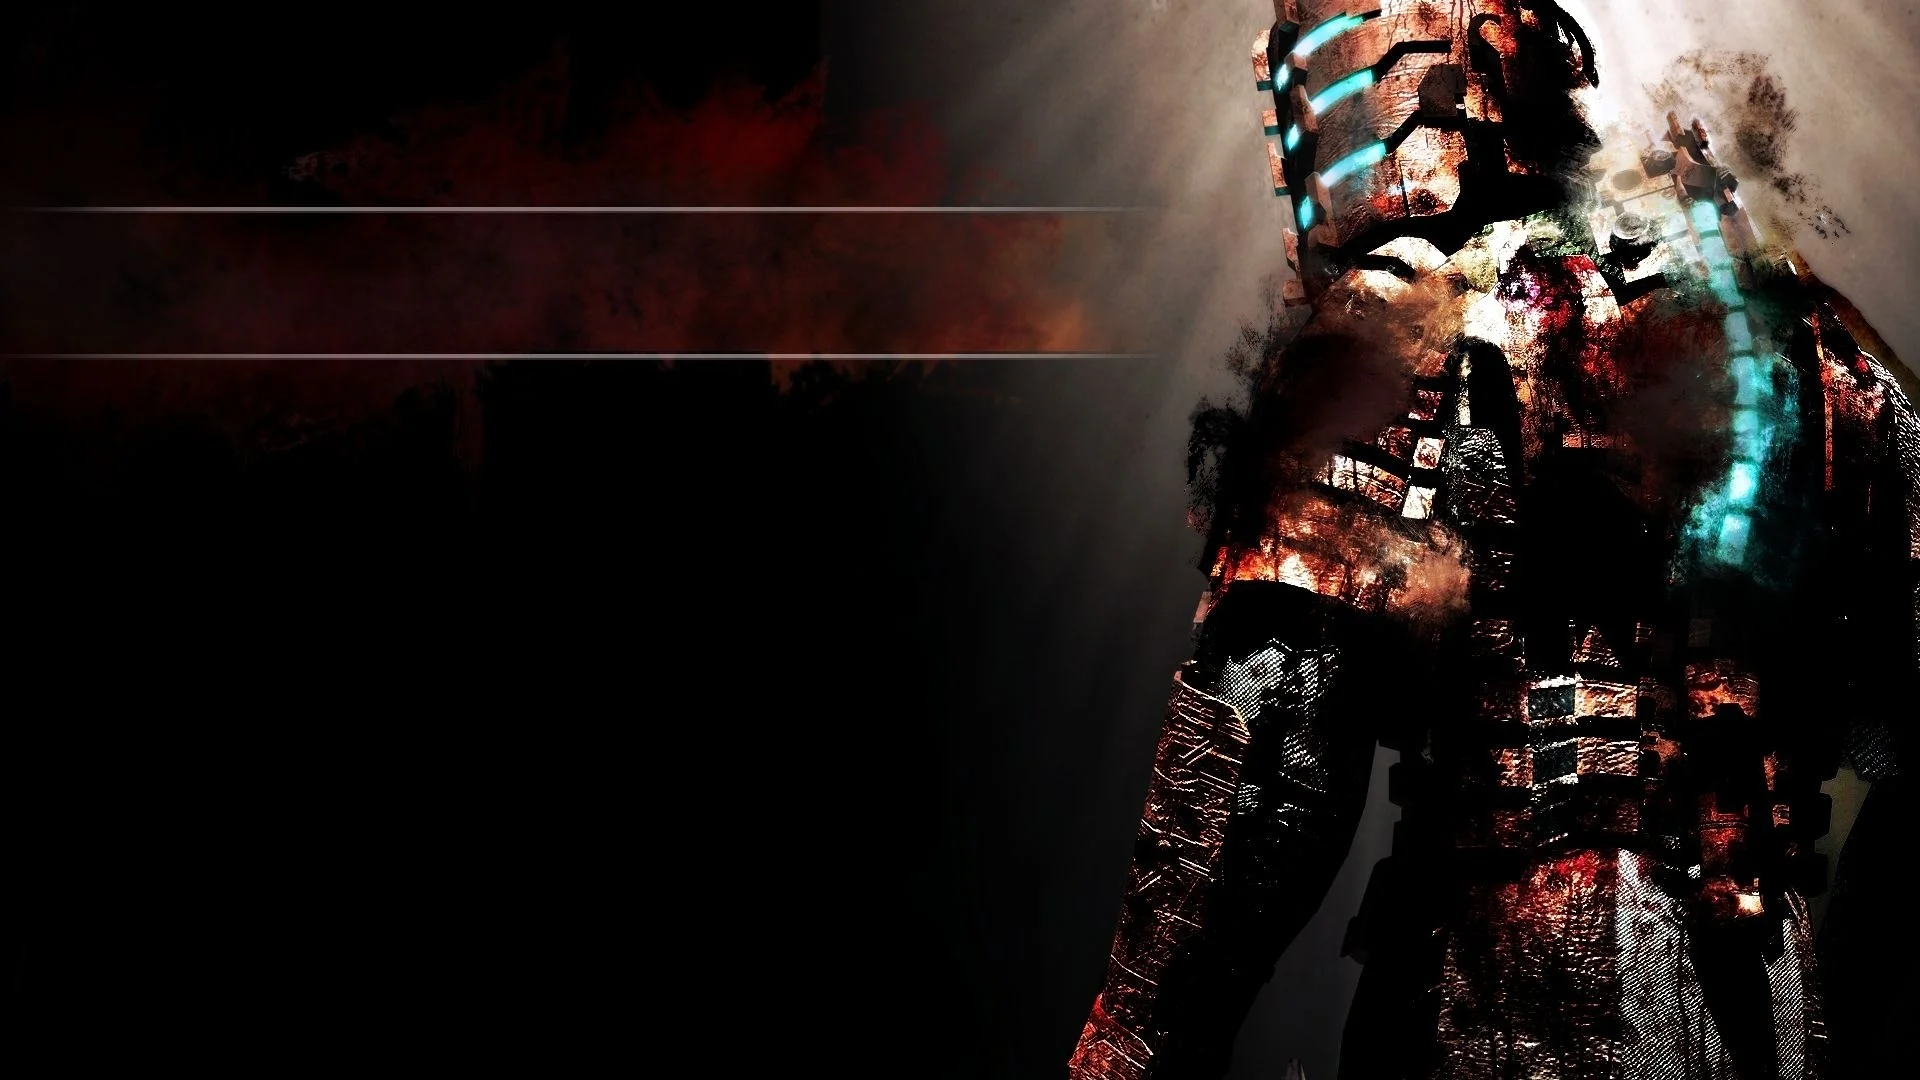 gore dead space badass game HD Wallpaper Space amp Planets 962271